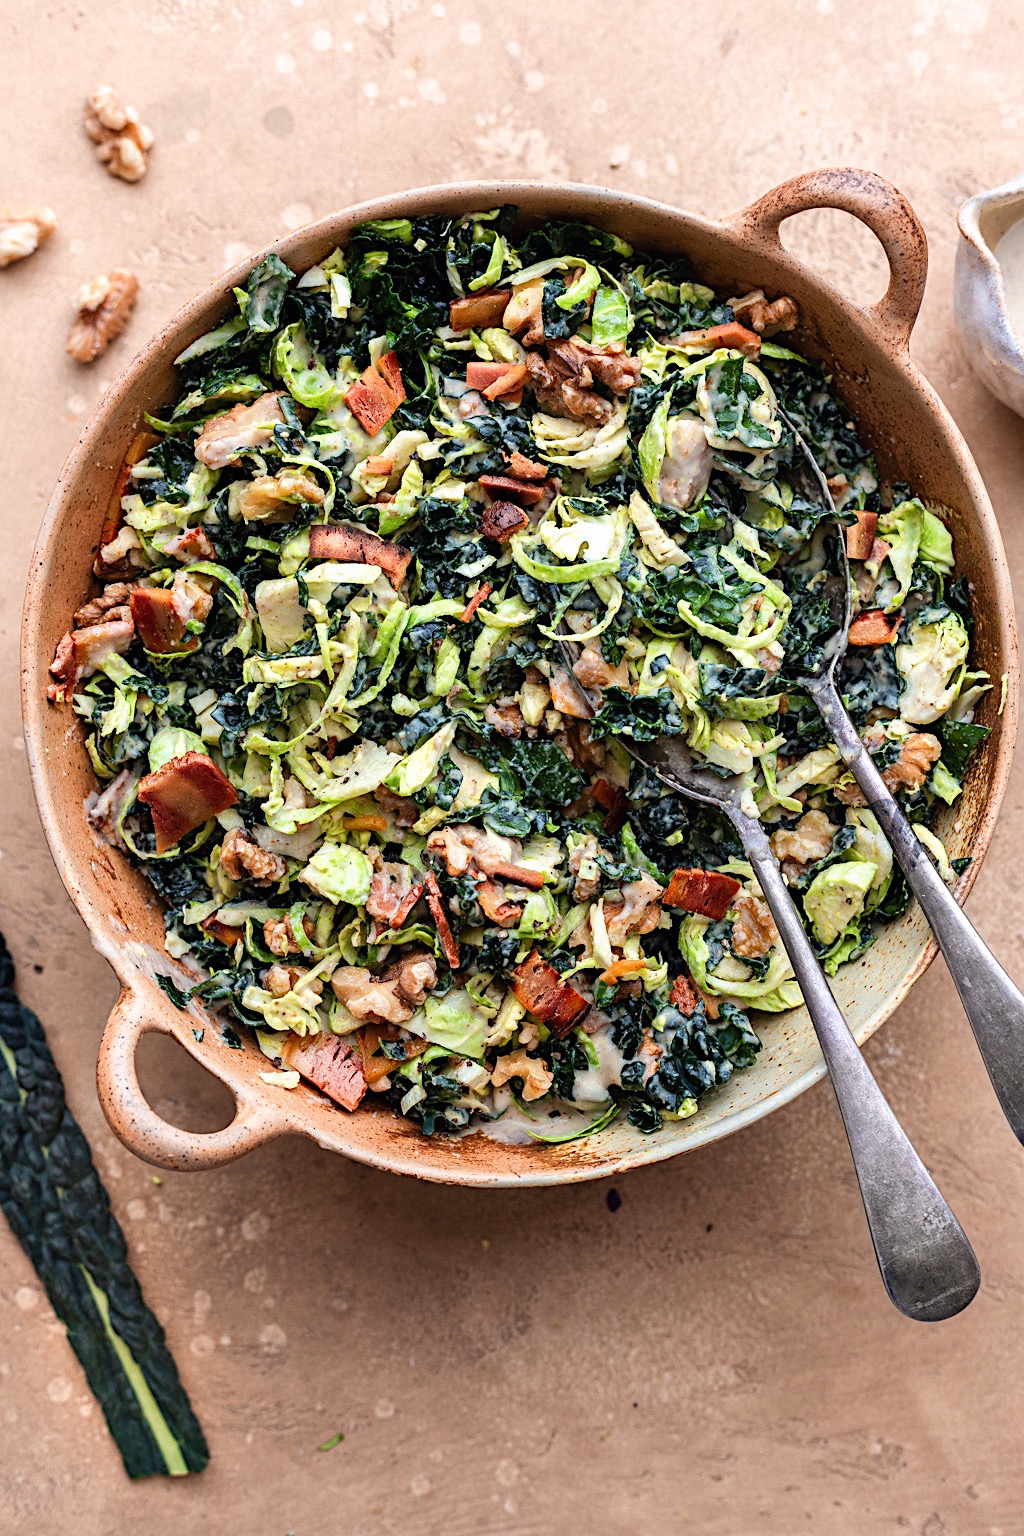 Shredded Sprouts, Kale, Walnut and Bacon Salad #salad #kale #brusselssprouts #bacon #vegan #dairyfree